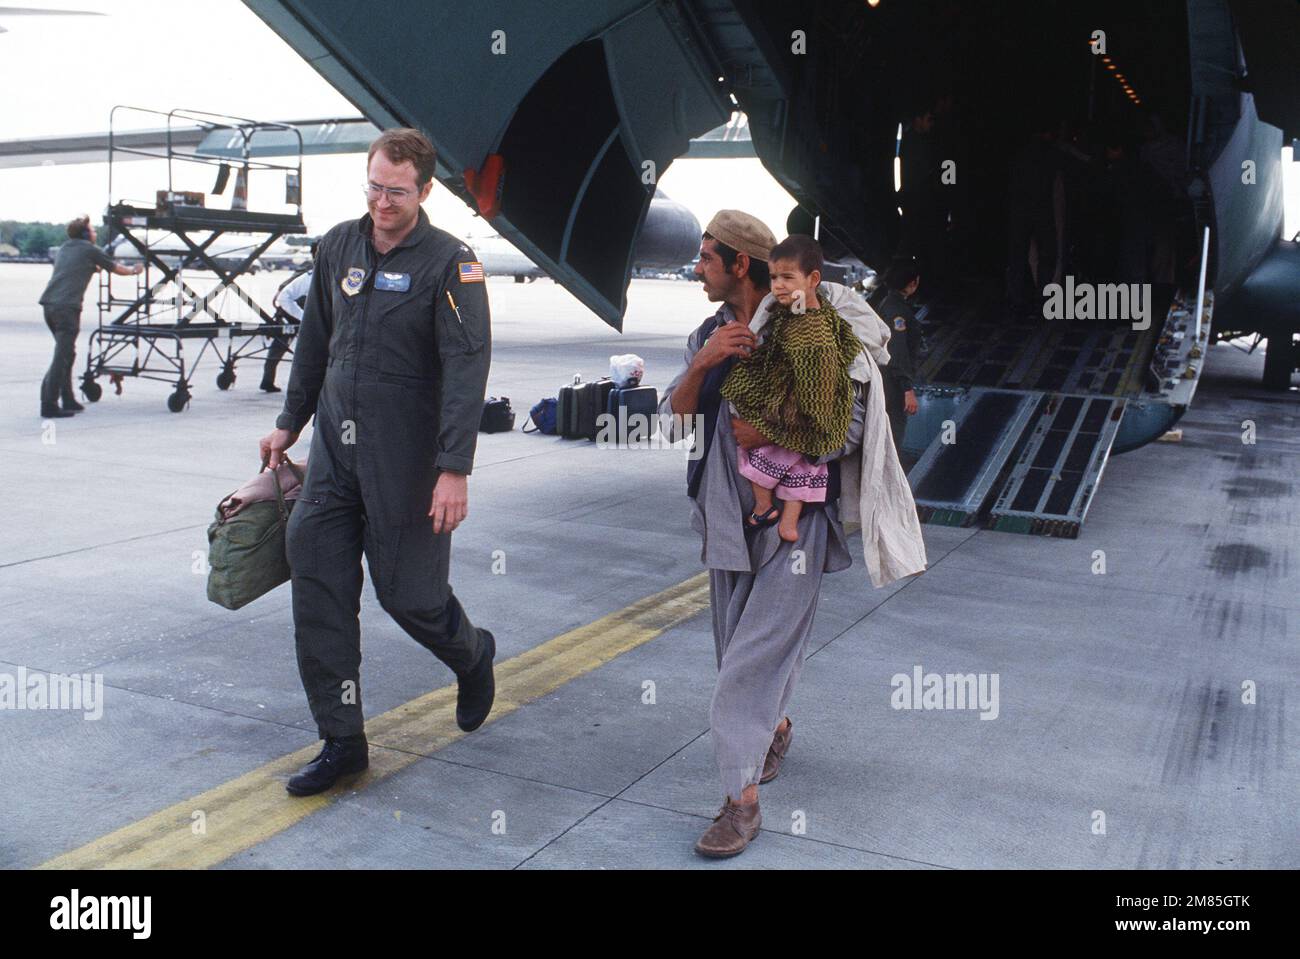 A Military Airlift Command airman escorts an Afghan man and child from a C-141B Starlifter aircraft toward an awaiting bus following their arrival on base. The two are among 25 Afghan civilians being transported to the US Air Force Regional Medical Center at Weisbaden, West Germany, for specialized medical treatment following injuries incurred as a result of Afghanistan's civil war. The patients will later be evacuated to hospitals in Europe and the United States for donated medical assistance. Base: Rhein-Main Air Base Country: Deutschland / Germany (DEU) Stock Photo